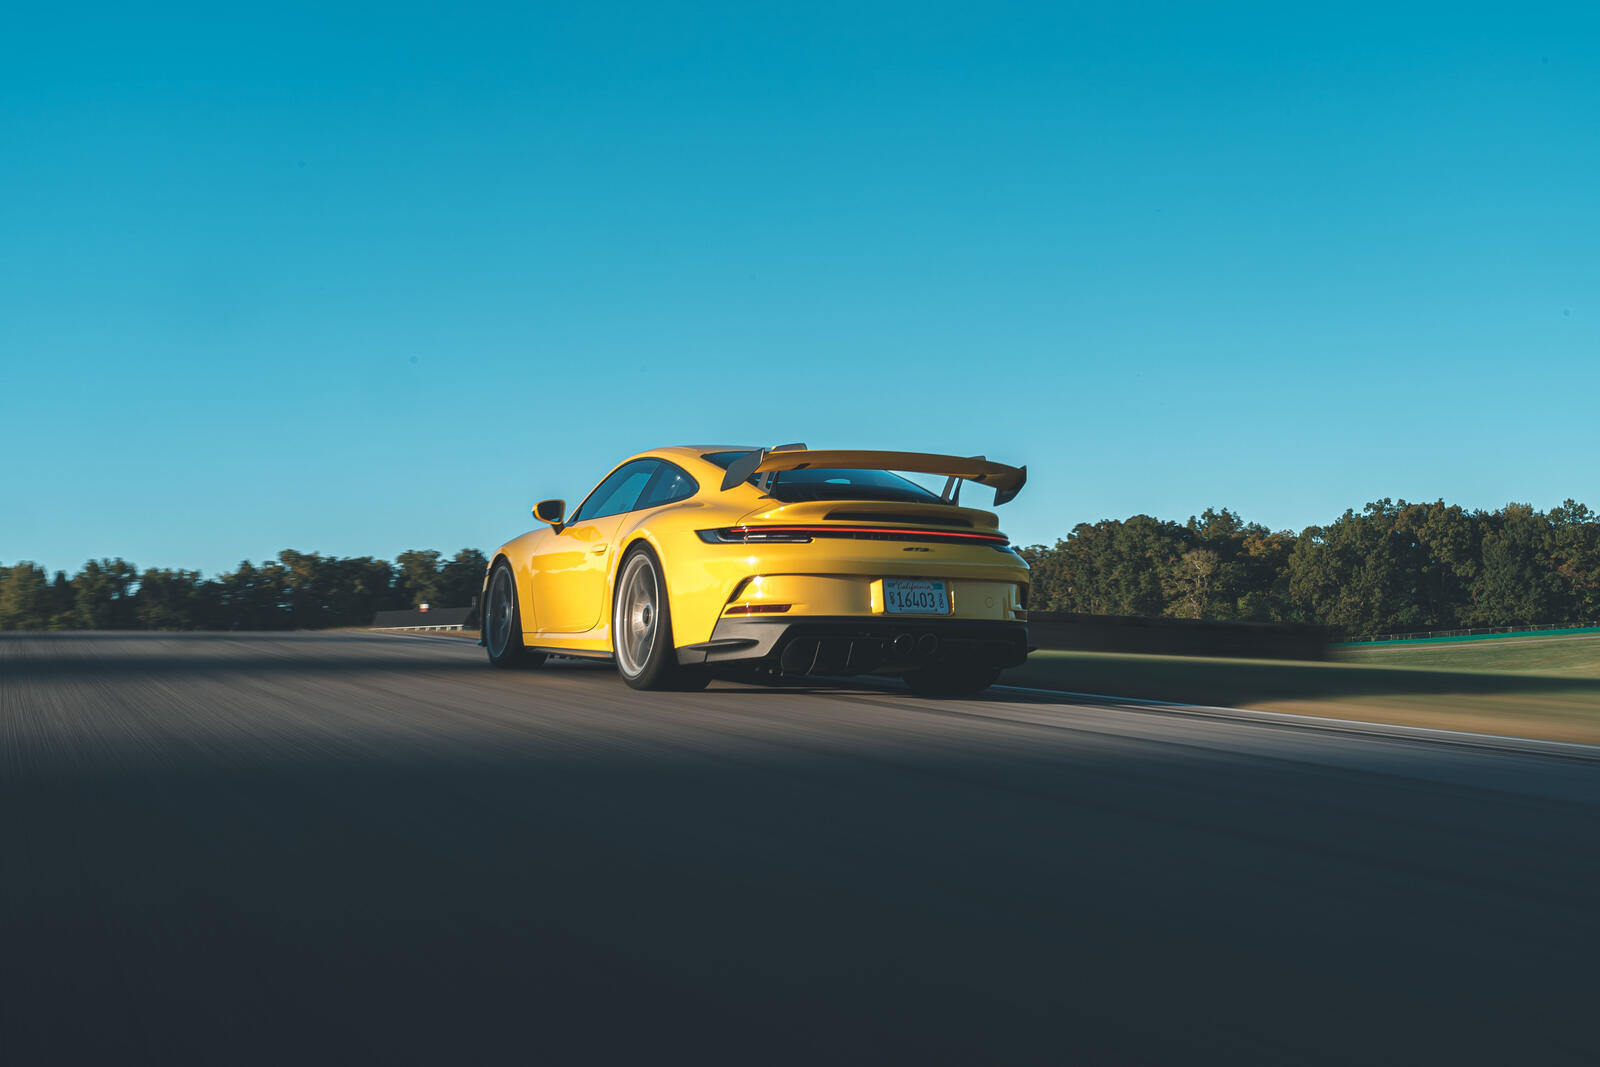 Free photo The Porsche 911 is pictured from behind